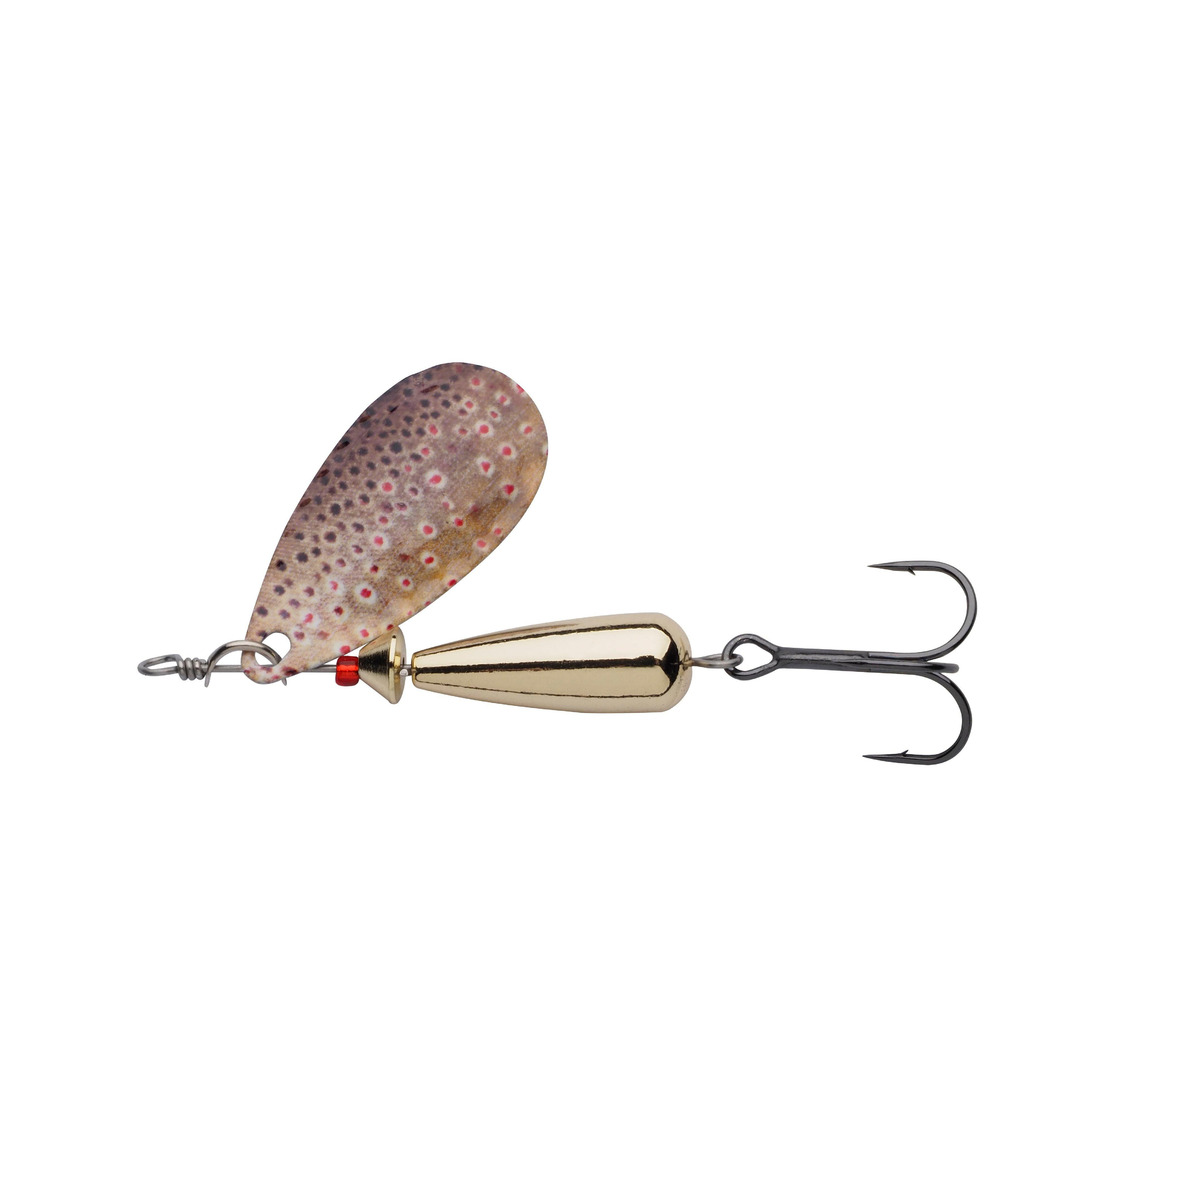 Abu Garcia Droppen Spinners 6 G - Brown Trout - 44 mm